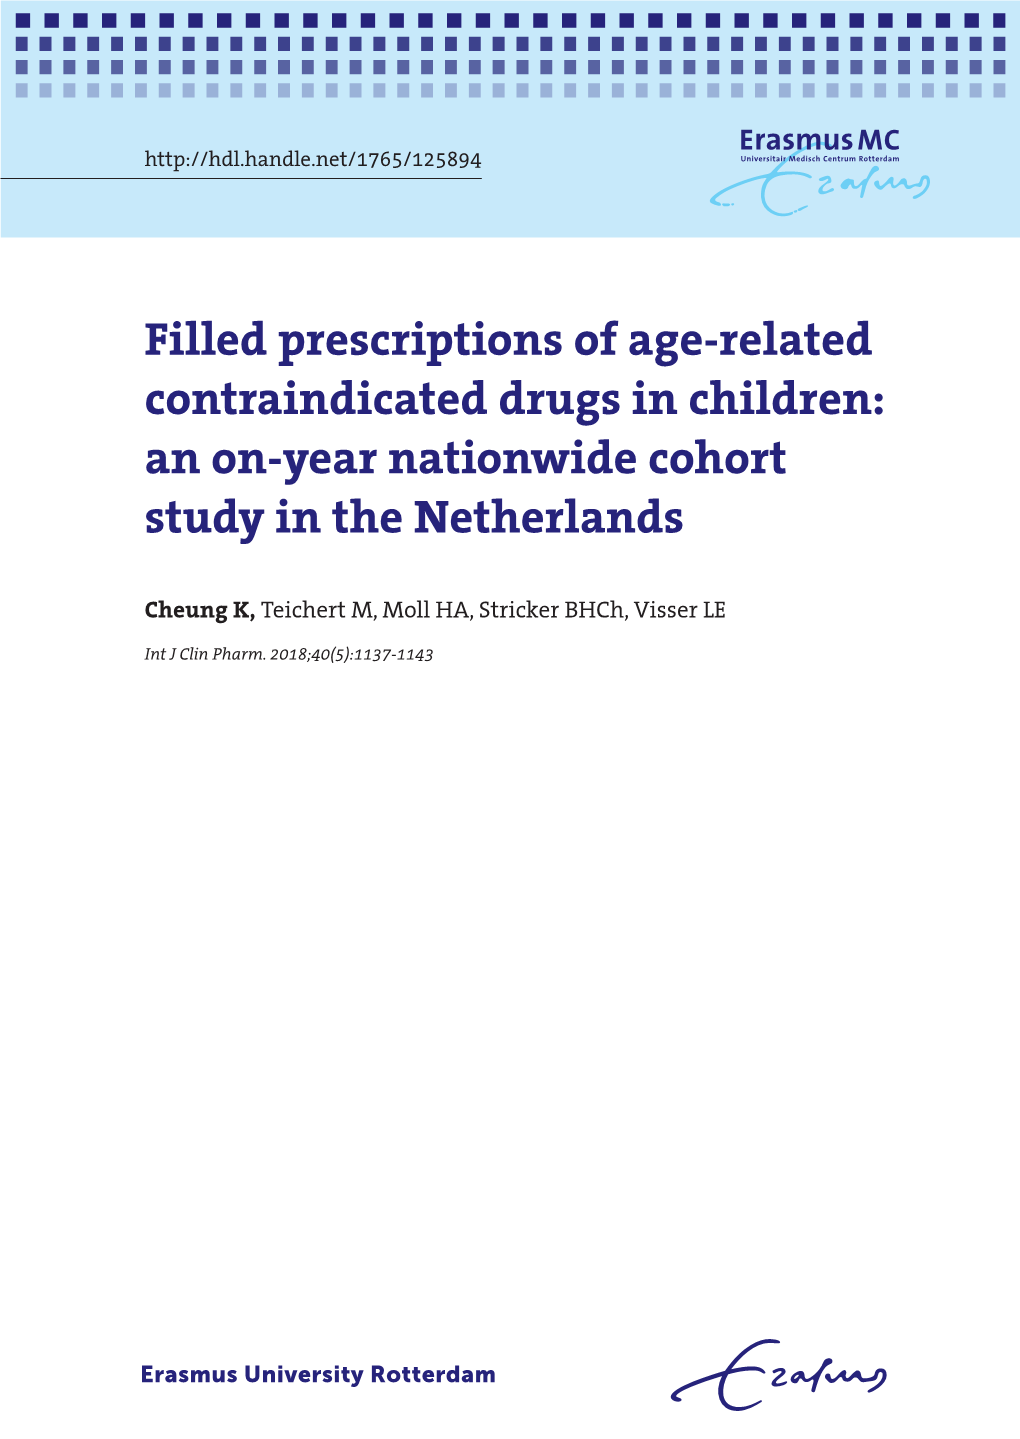 Filled Prescriptions of Age-Related Contraindicated Drugs in Children